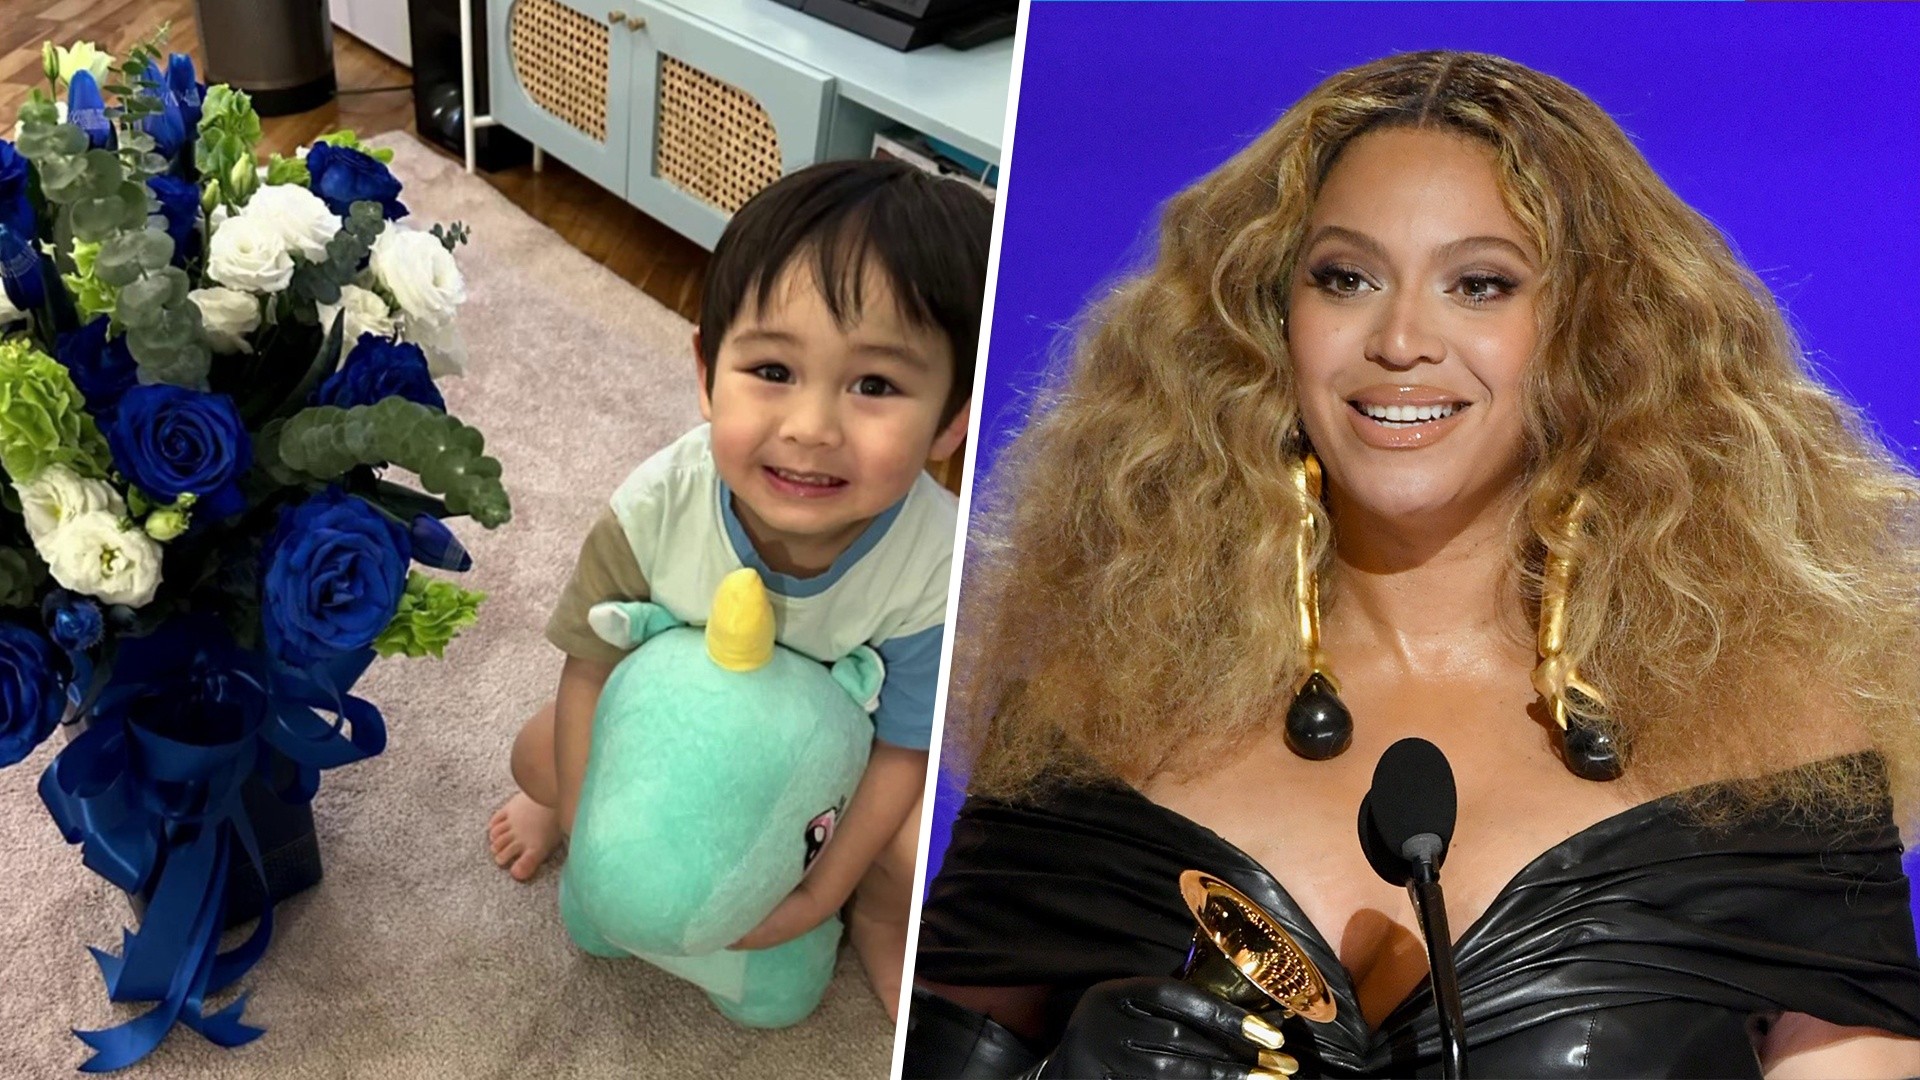 Beyoncé sends surprise to young fan who wanted to be her friend